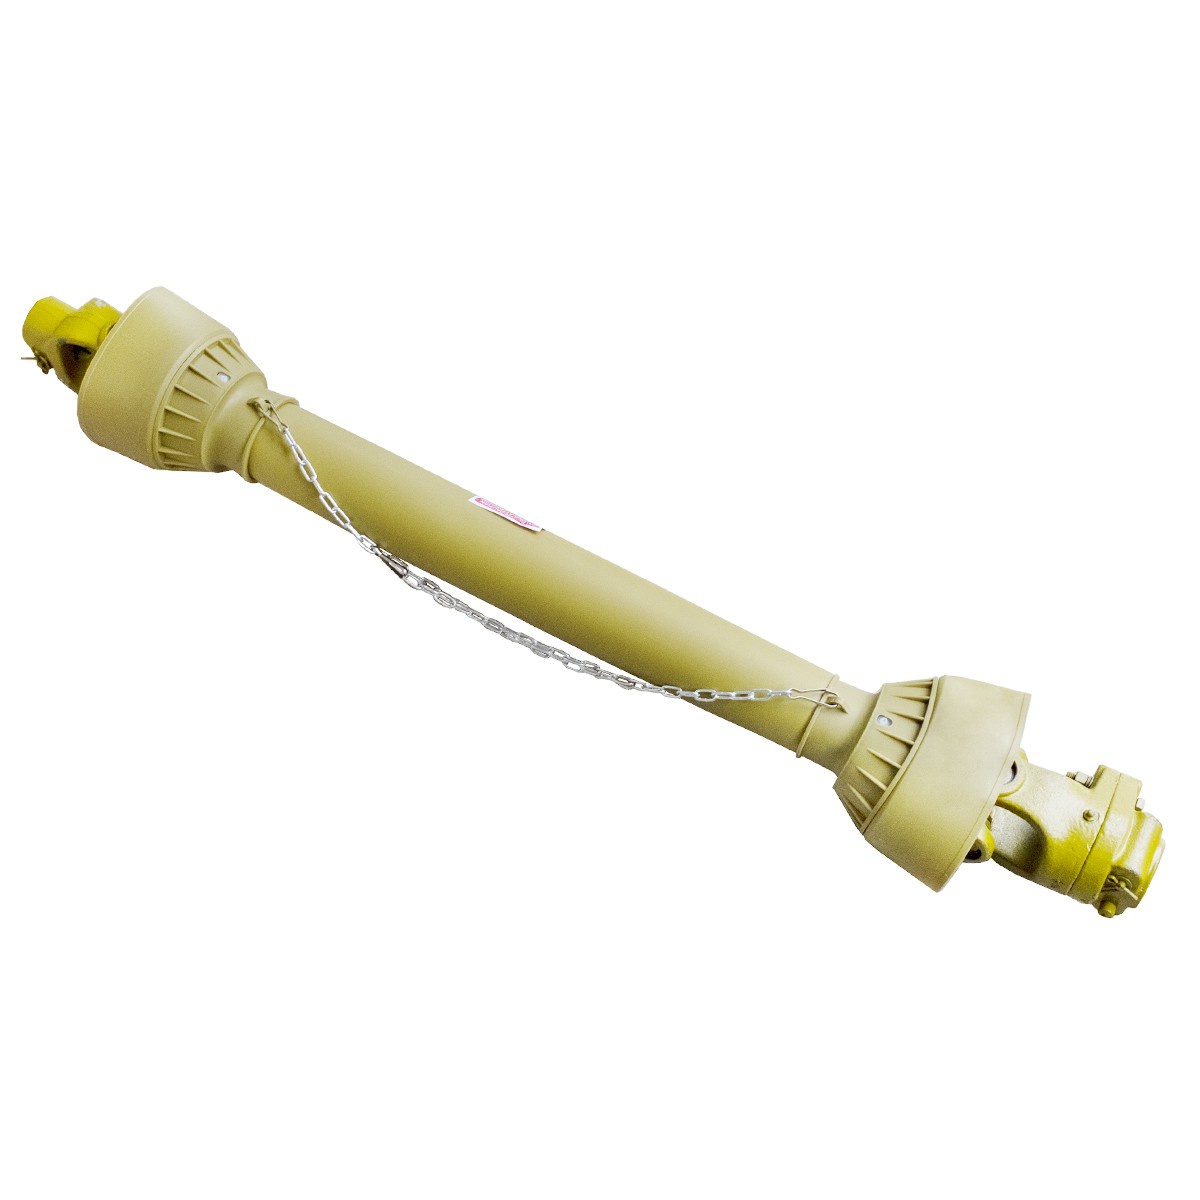 065b 60 100km approximately 900nm - PTO shaft with breakaway wedge 065B - 120 cm / up to 100 HP